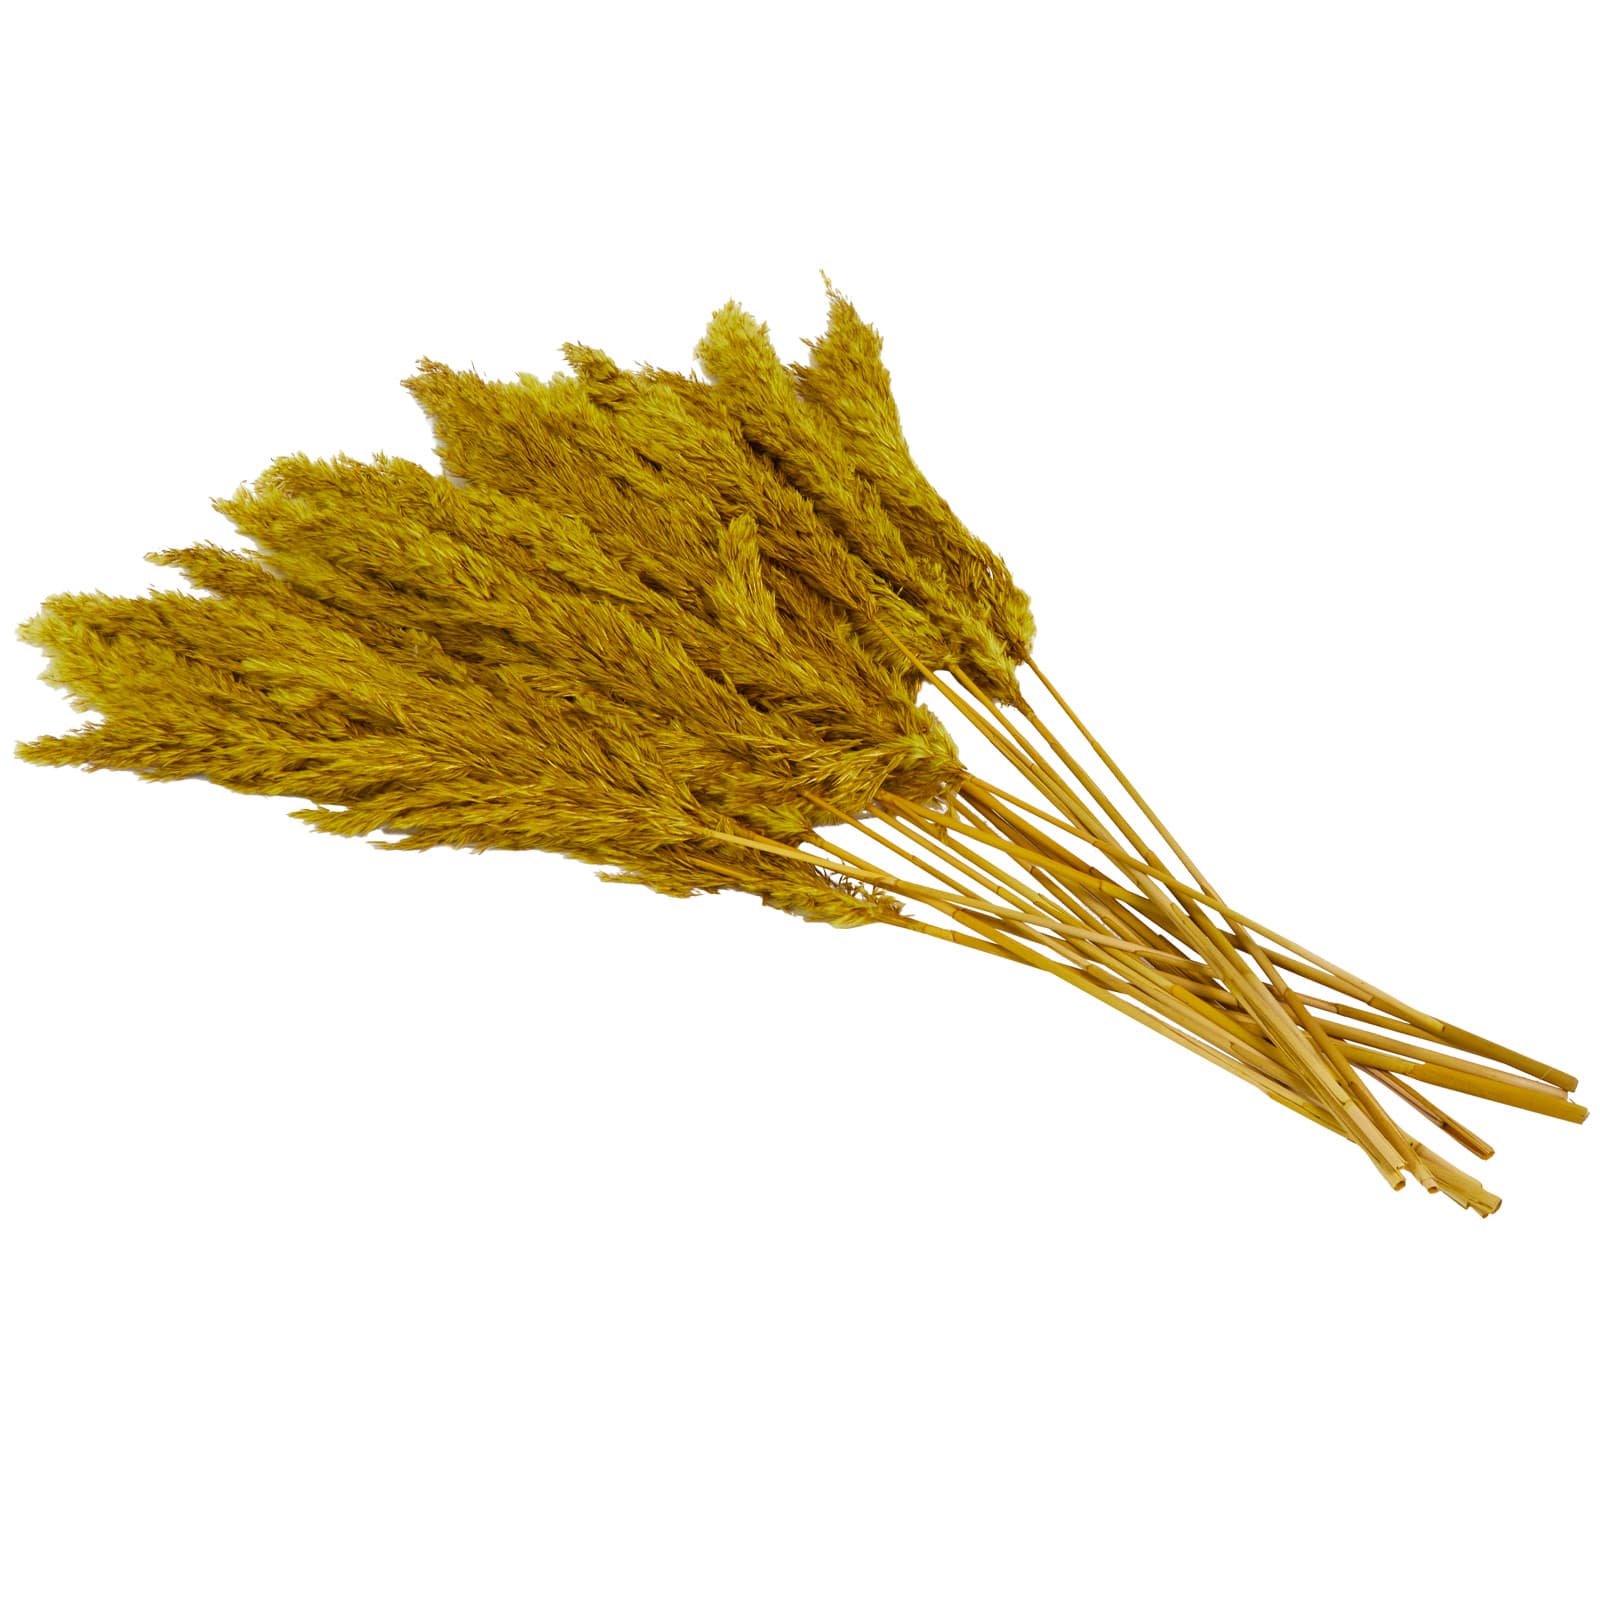 Dried Plant Pampas Natural Foliage with Long Stems